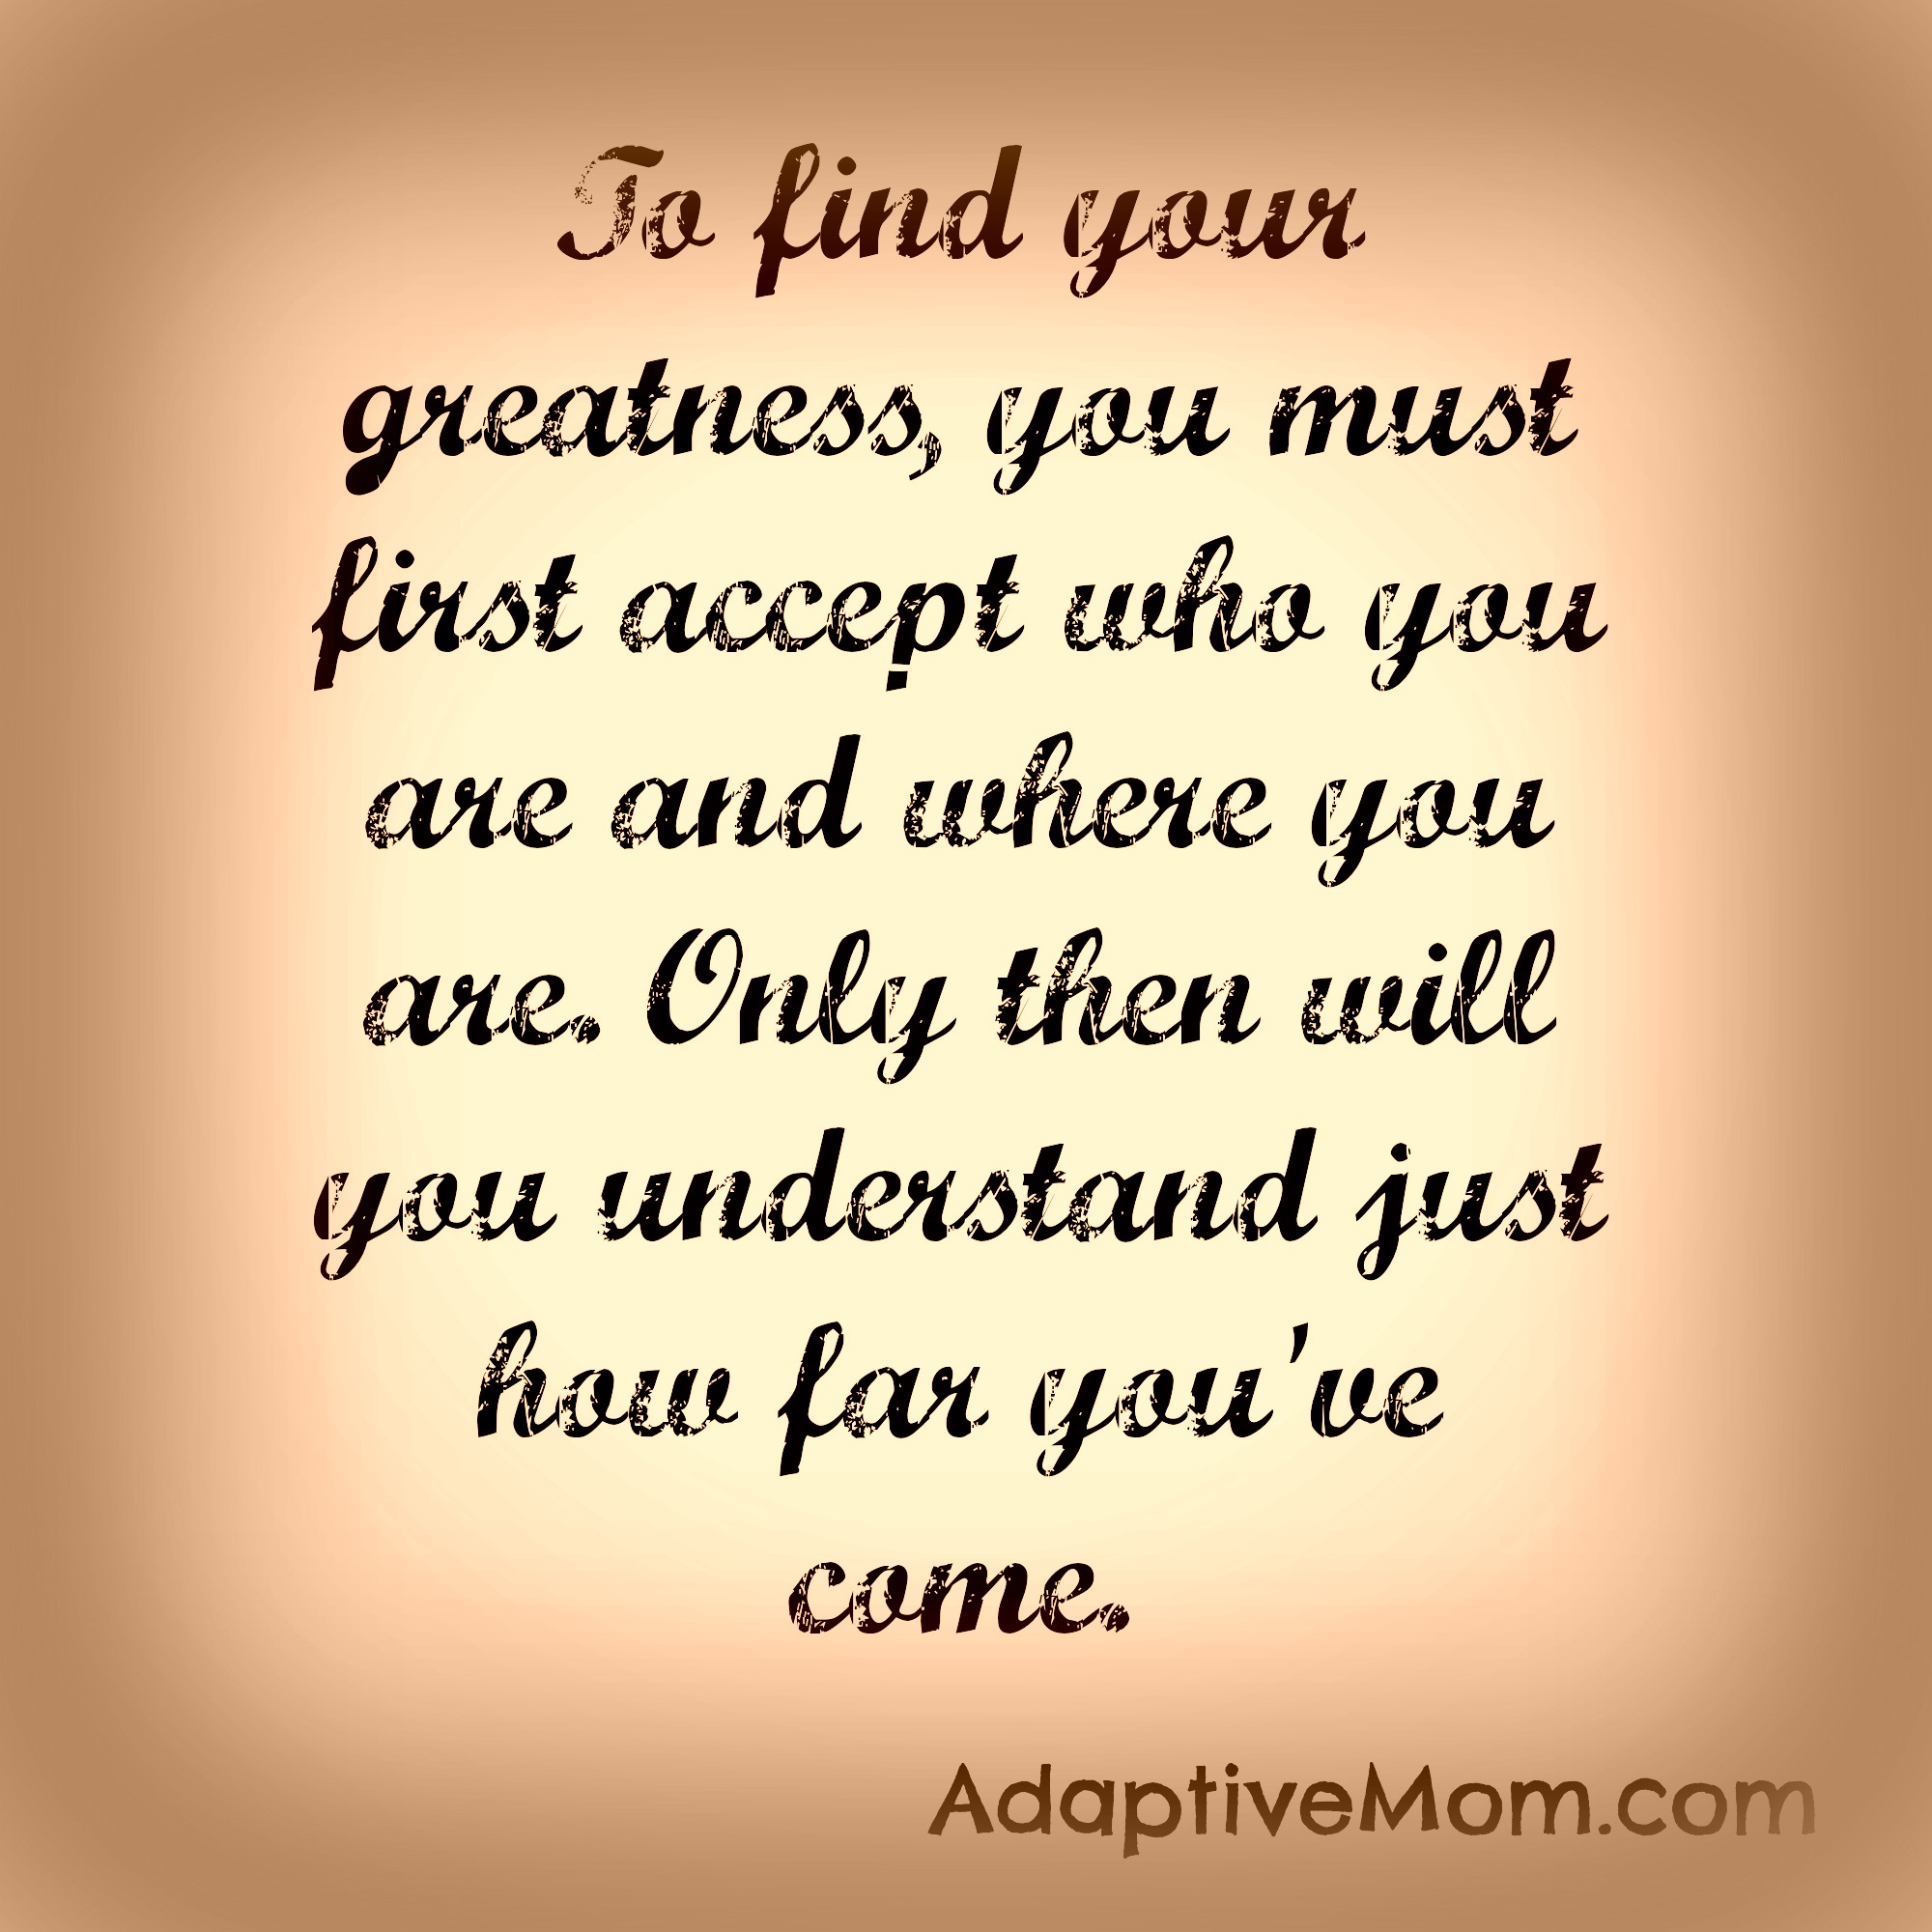 adaptivemom.com, be yourself, acceptance, love yourself, love the journey, workfromhomeorganically.com,